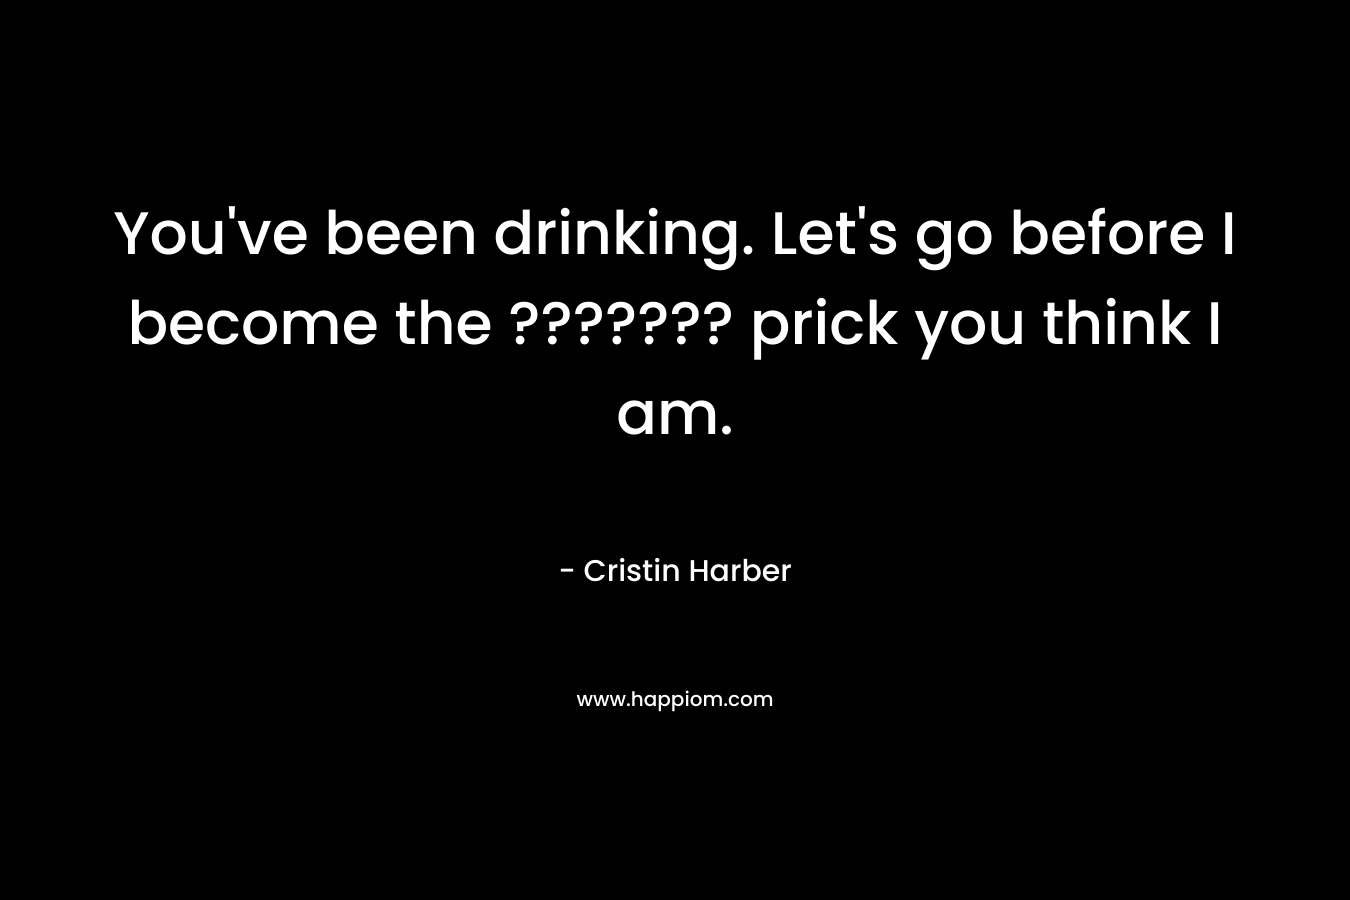 You’ve been drinking. Let’s go before I become the ??????? prick you think I am. – Cristin Harber